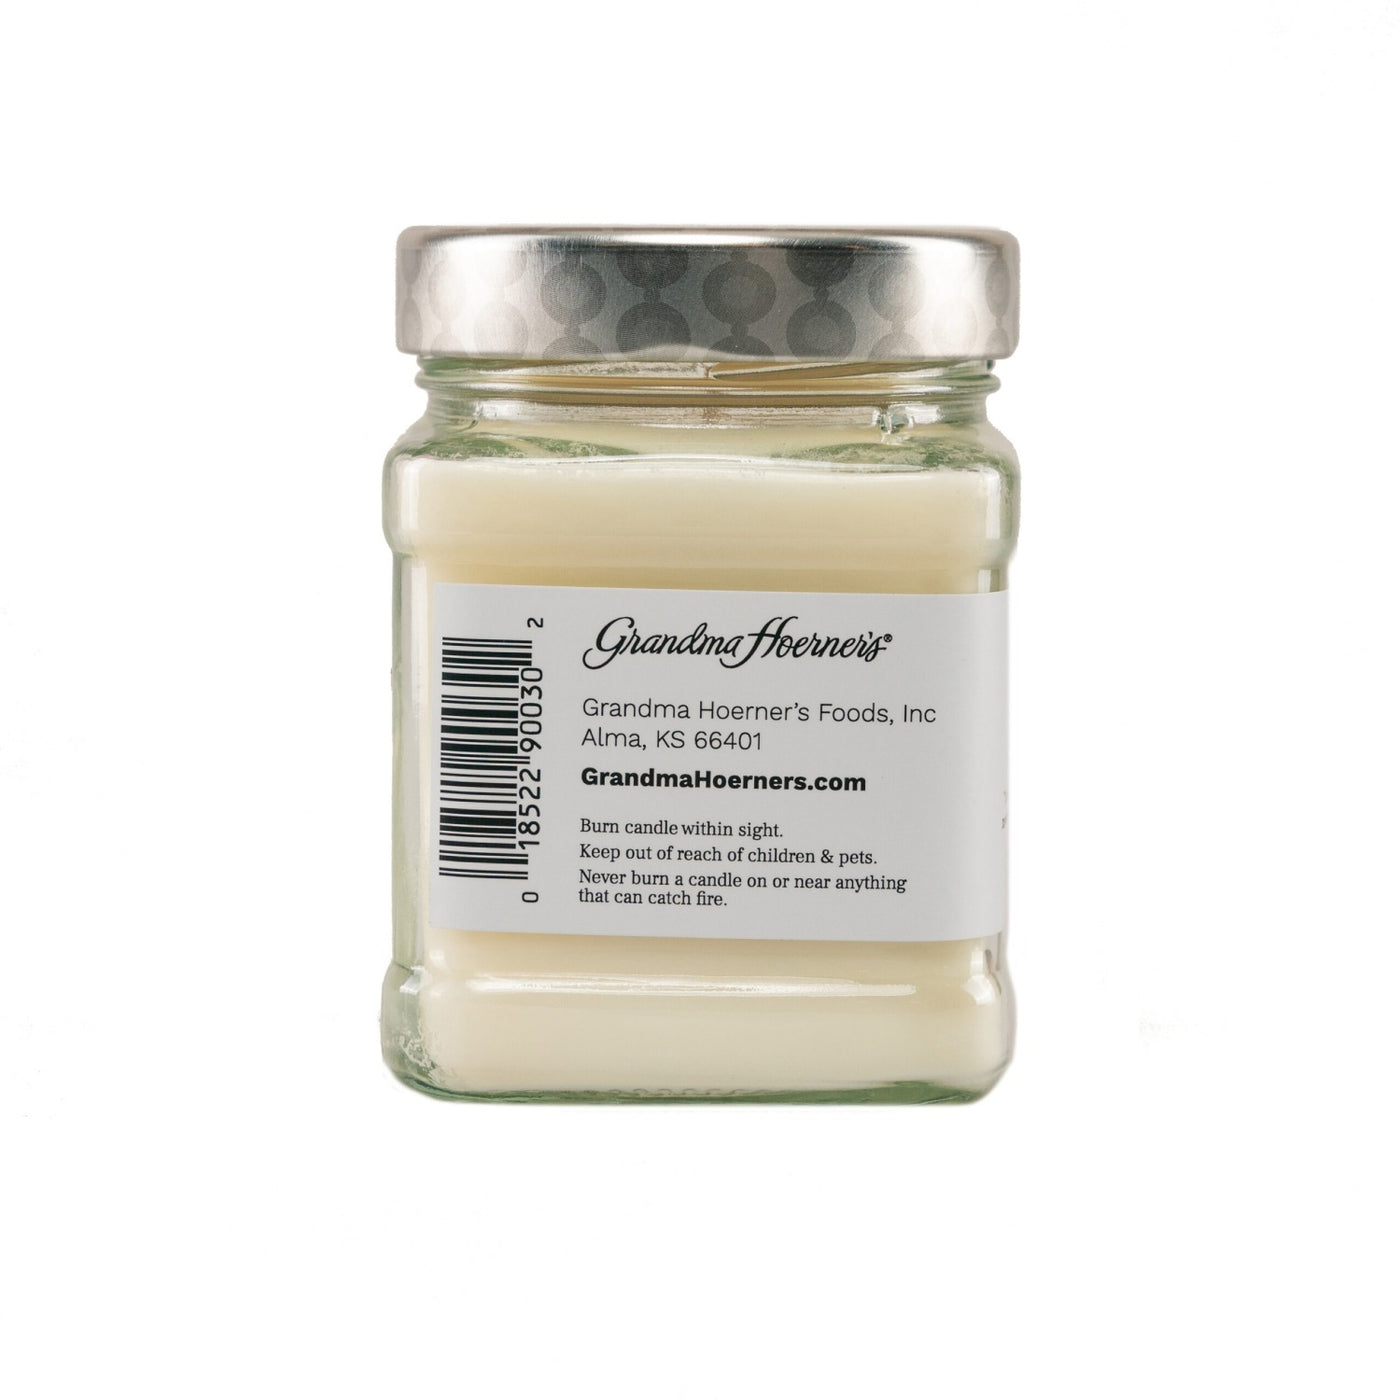 Candles - Scents Of Her Life - Evening Storm Candle